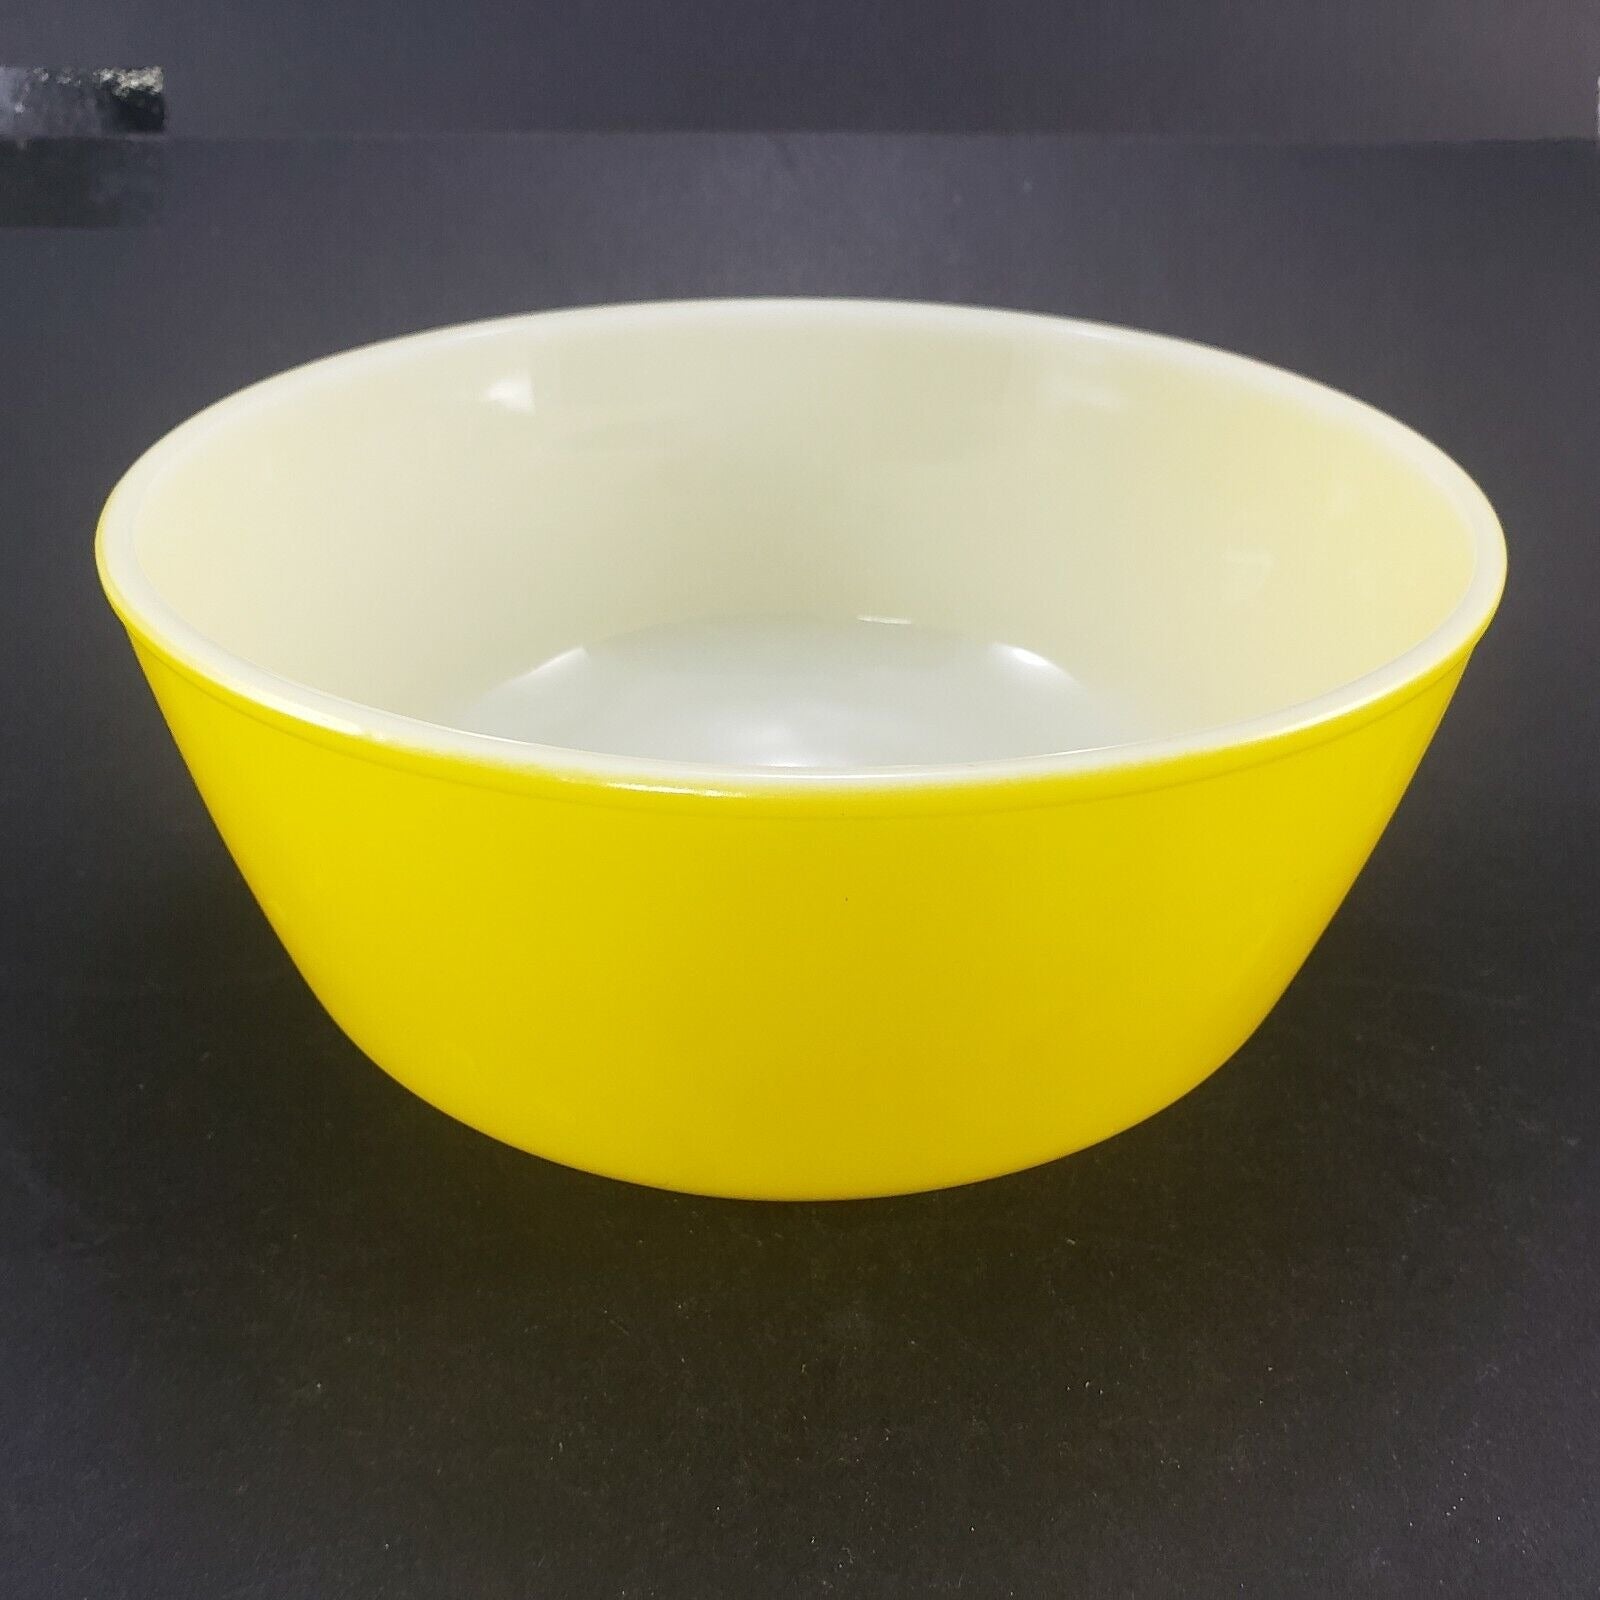 Set of 3 Vintage 1940s Light Yellow Glass Nesting Mixing Bowls by